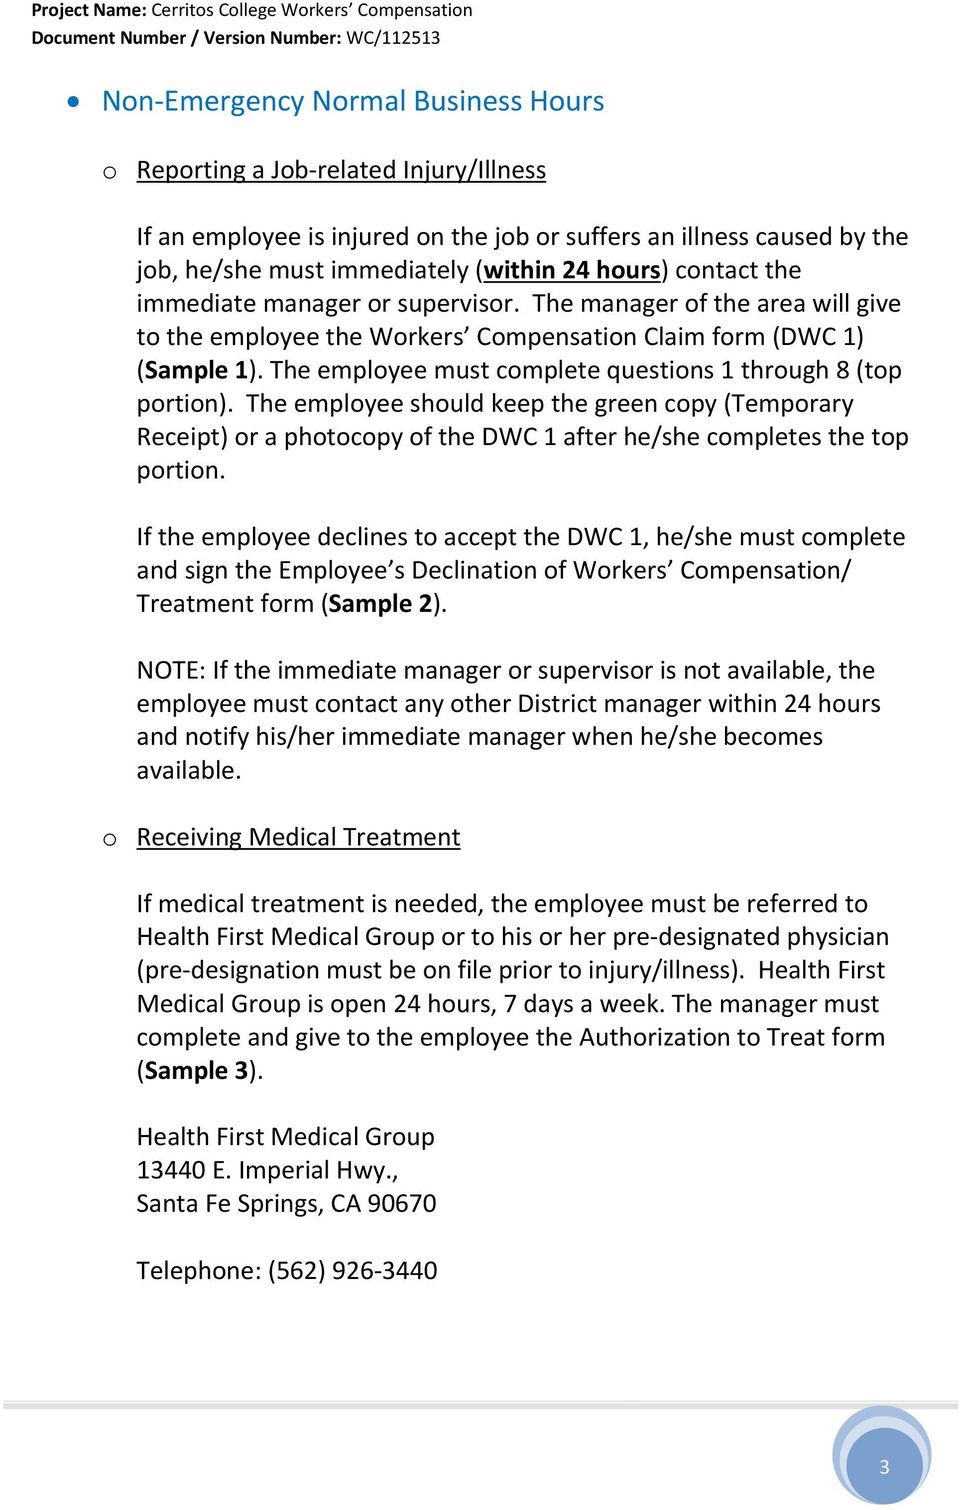 The employee must complete questions 1 through 8 (top portion). The employee should keep the green copy (Temporary Receipt) or a photocopy of the DWC 1 after he/she completes the top portion.